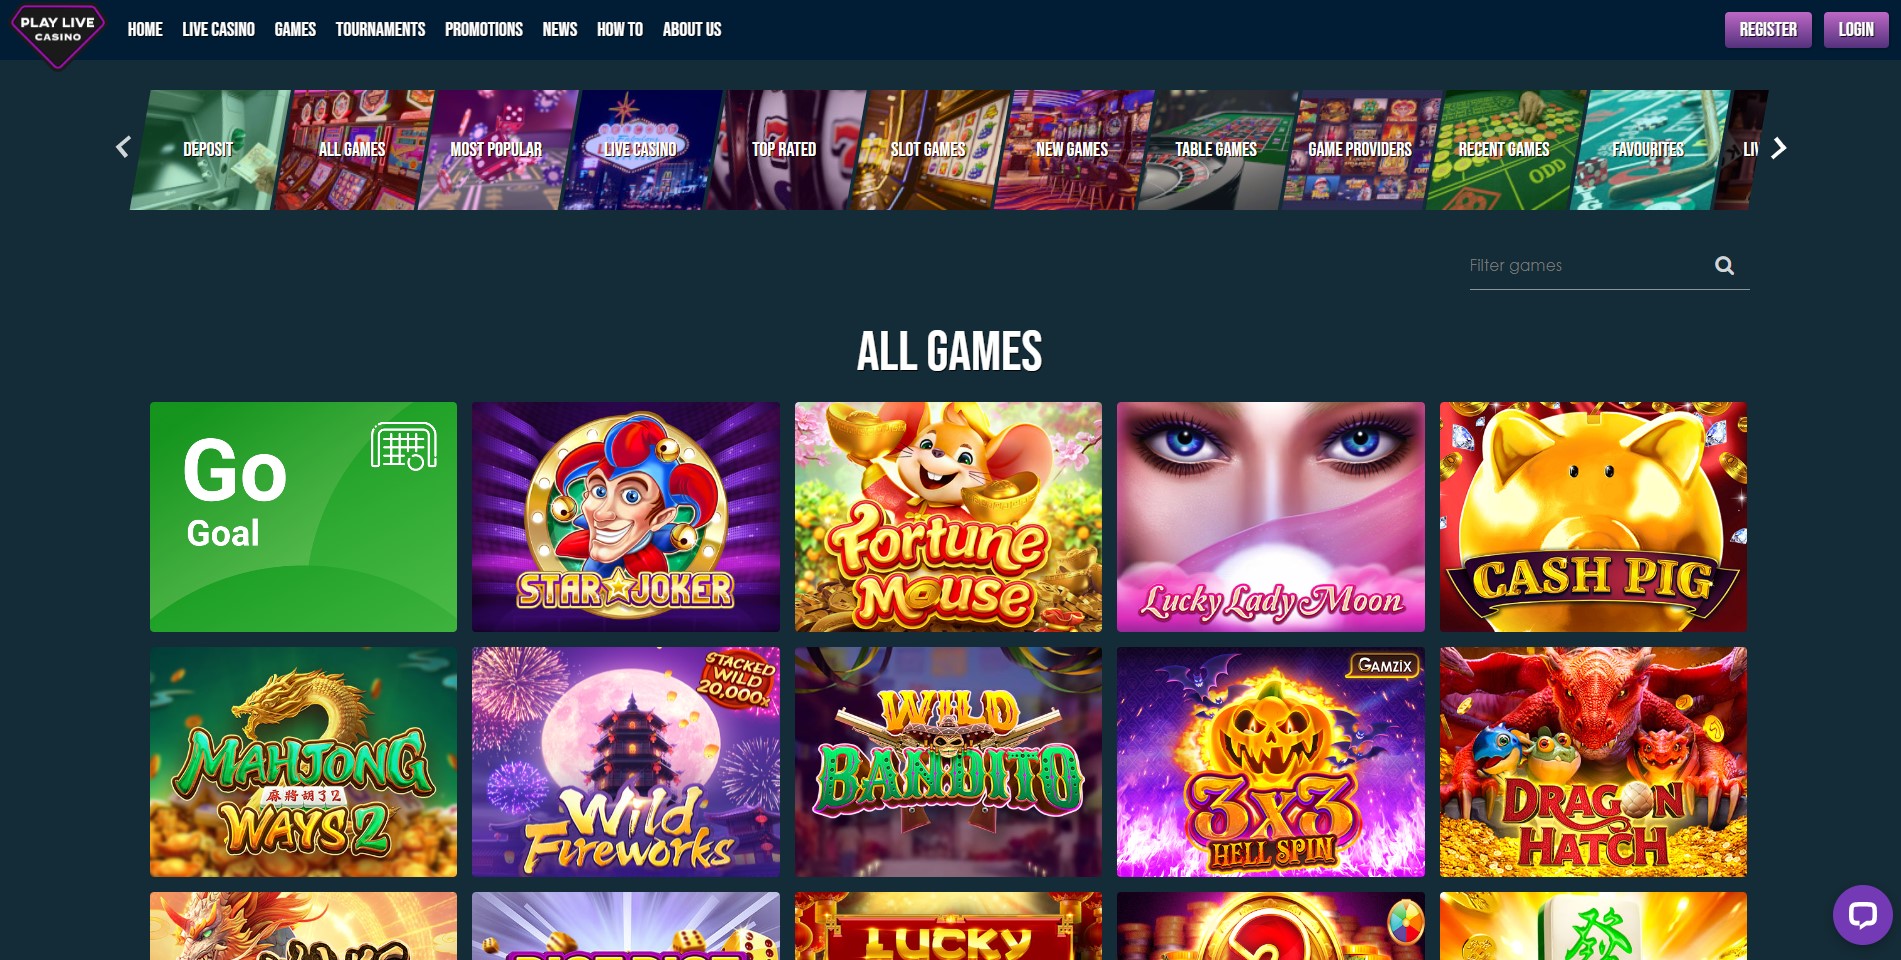 Games at Playlive casino